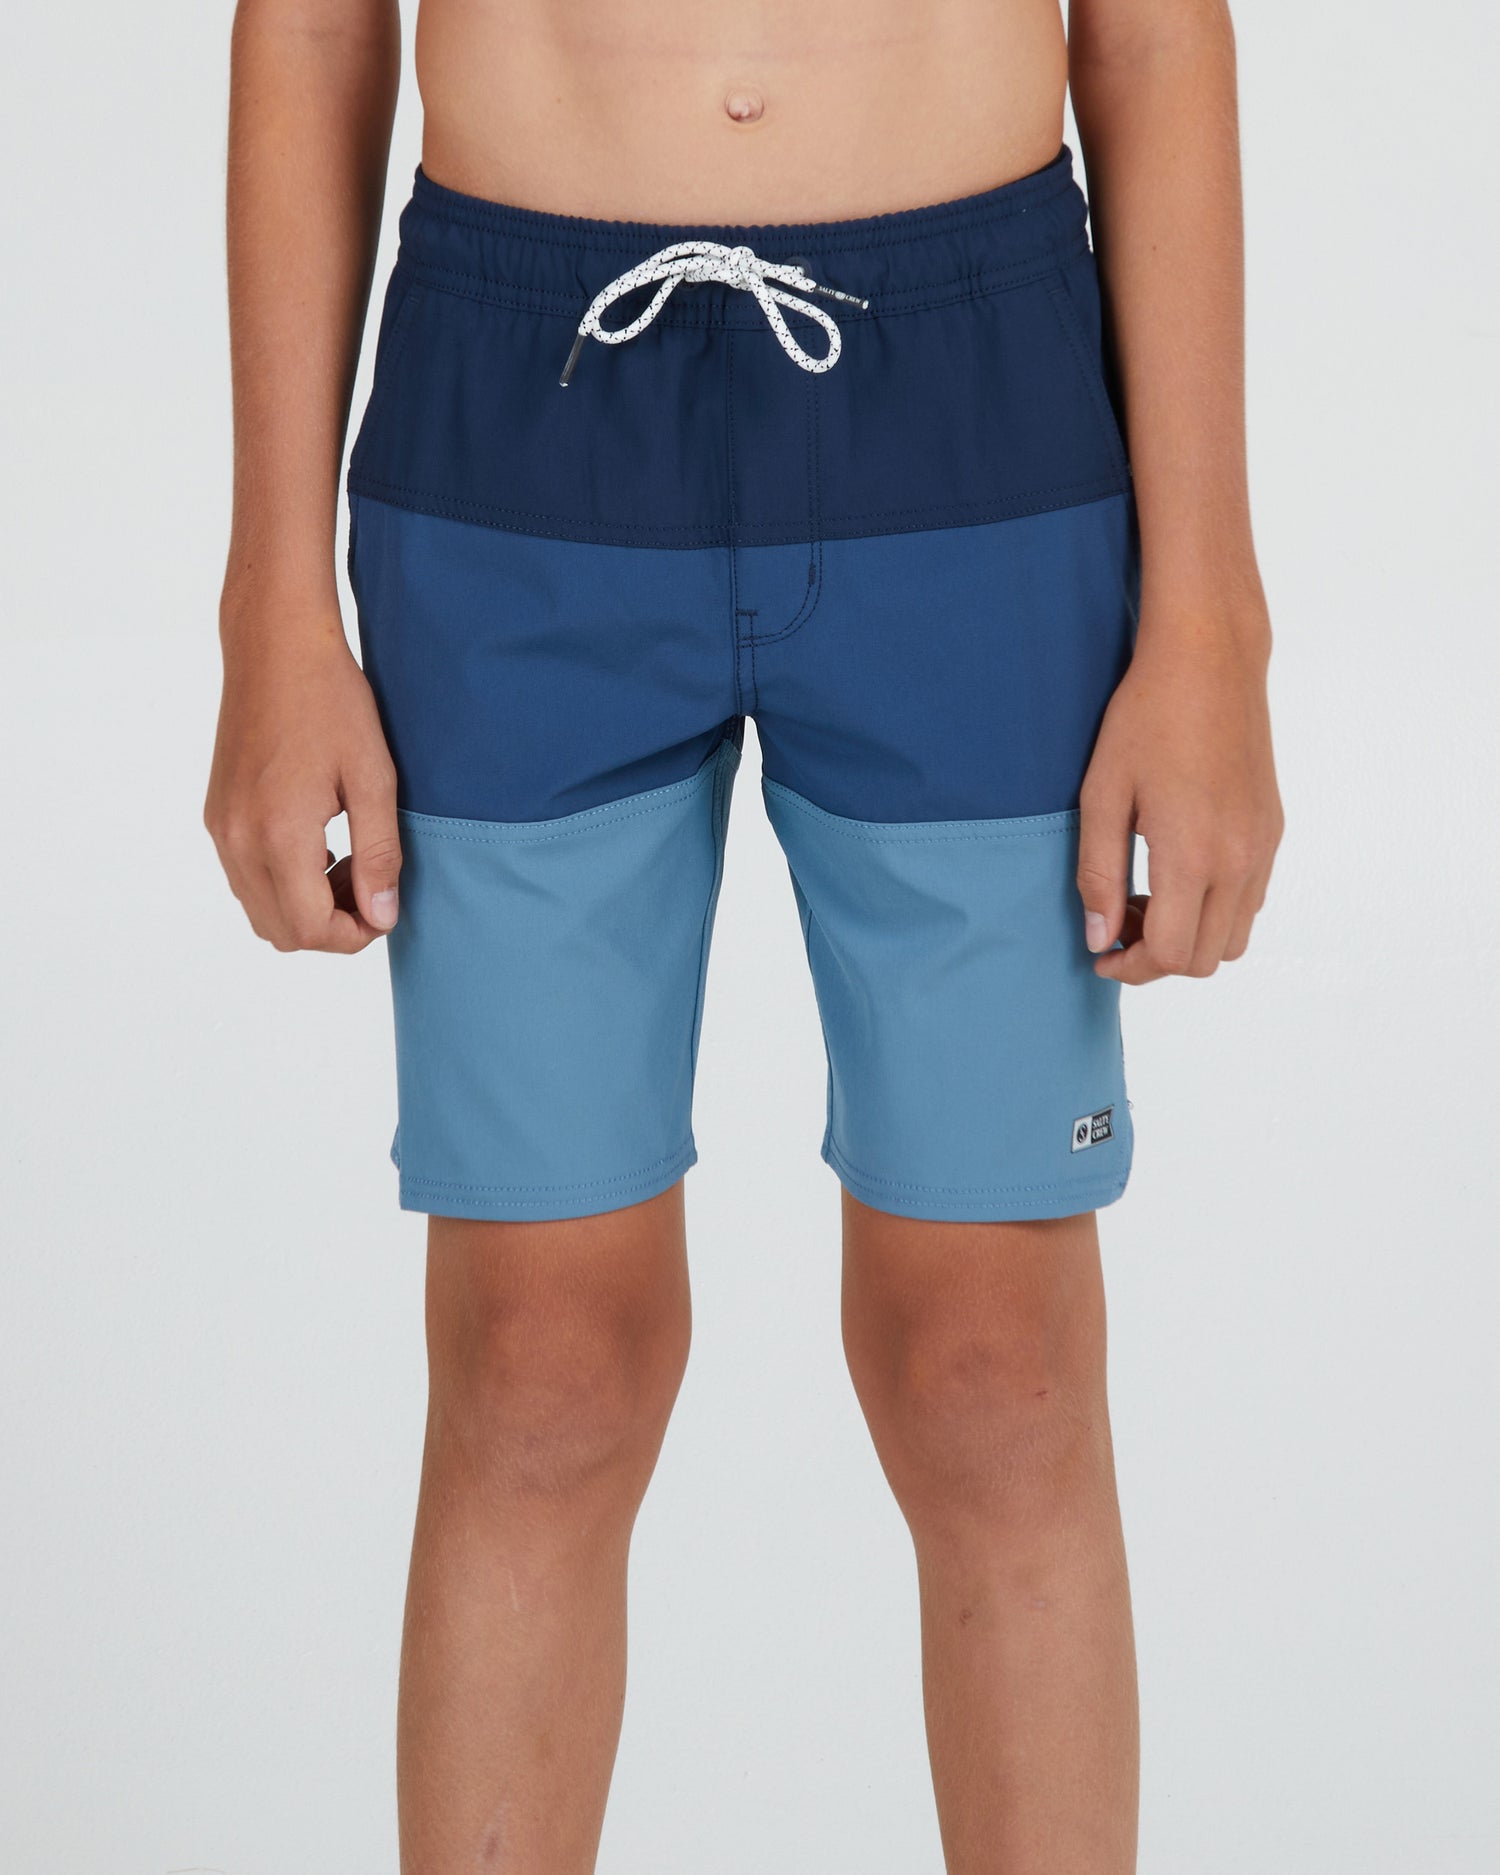 front view of Beacons 2 Boys Blue Elastic Boardshort